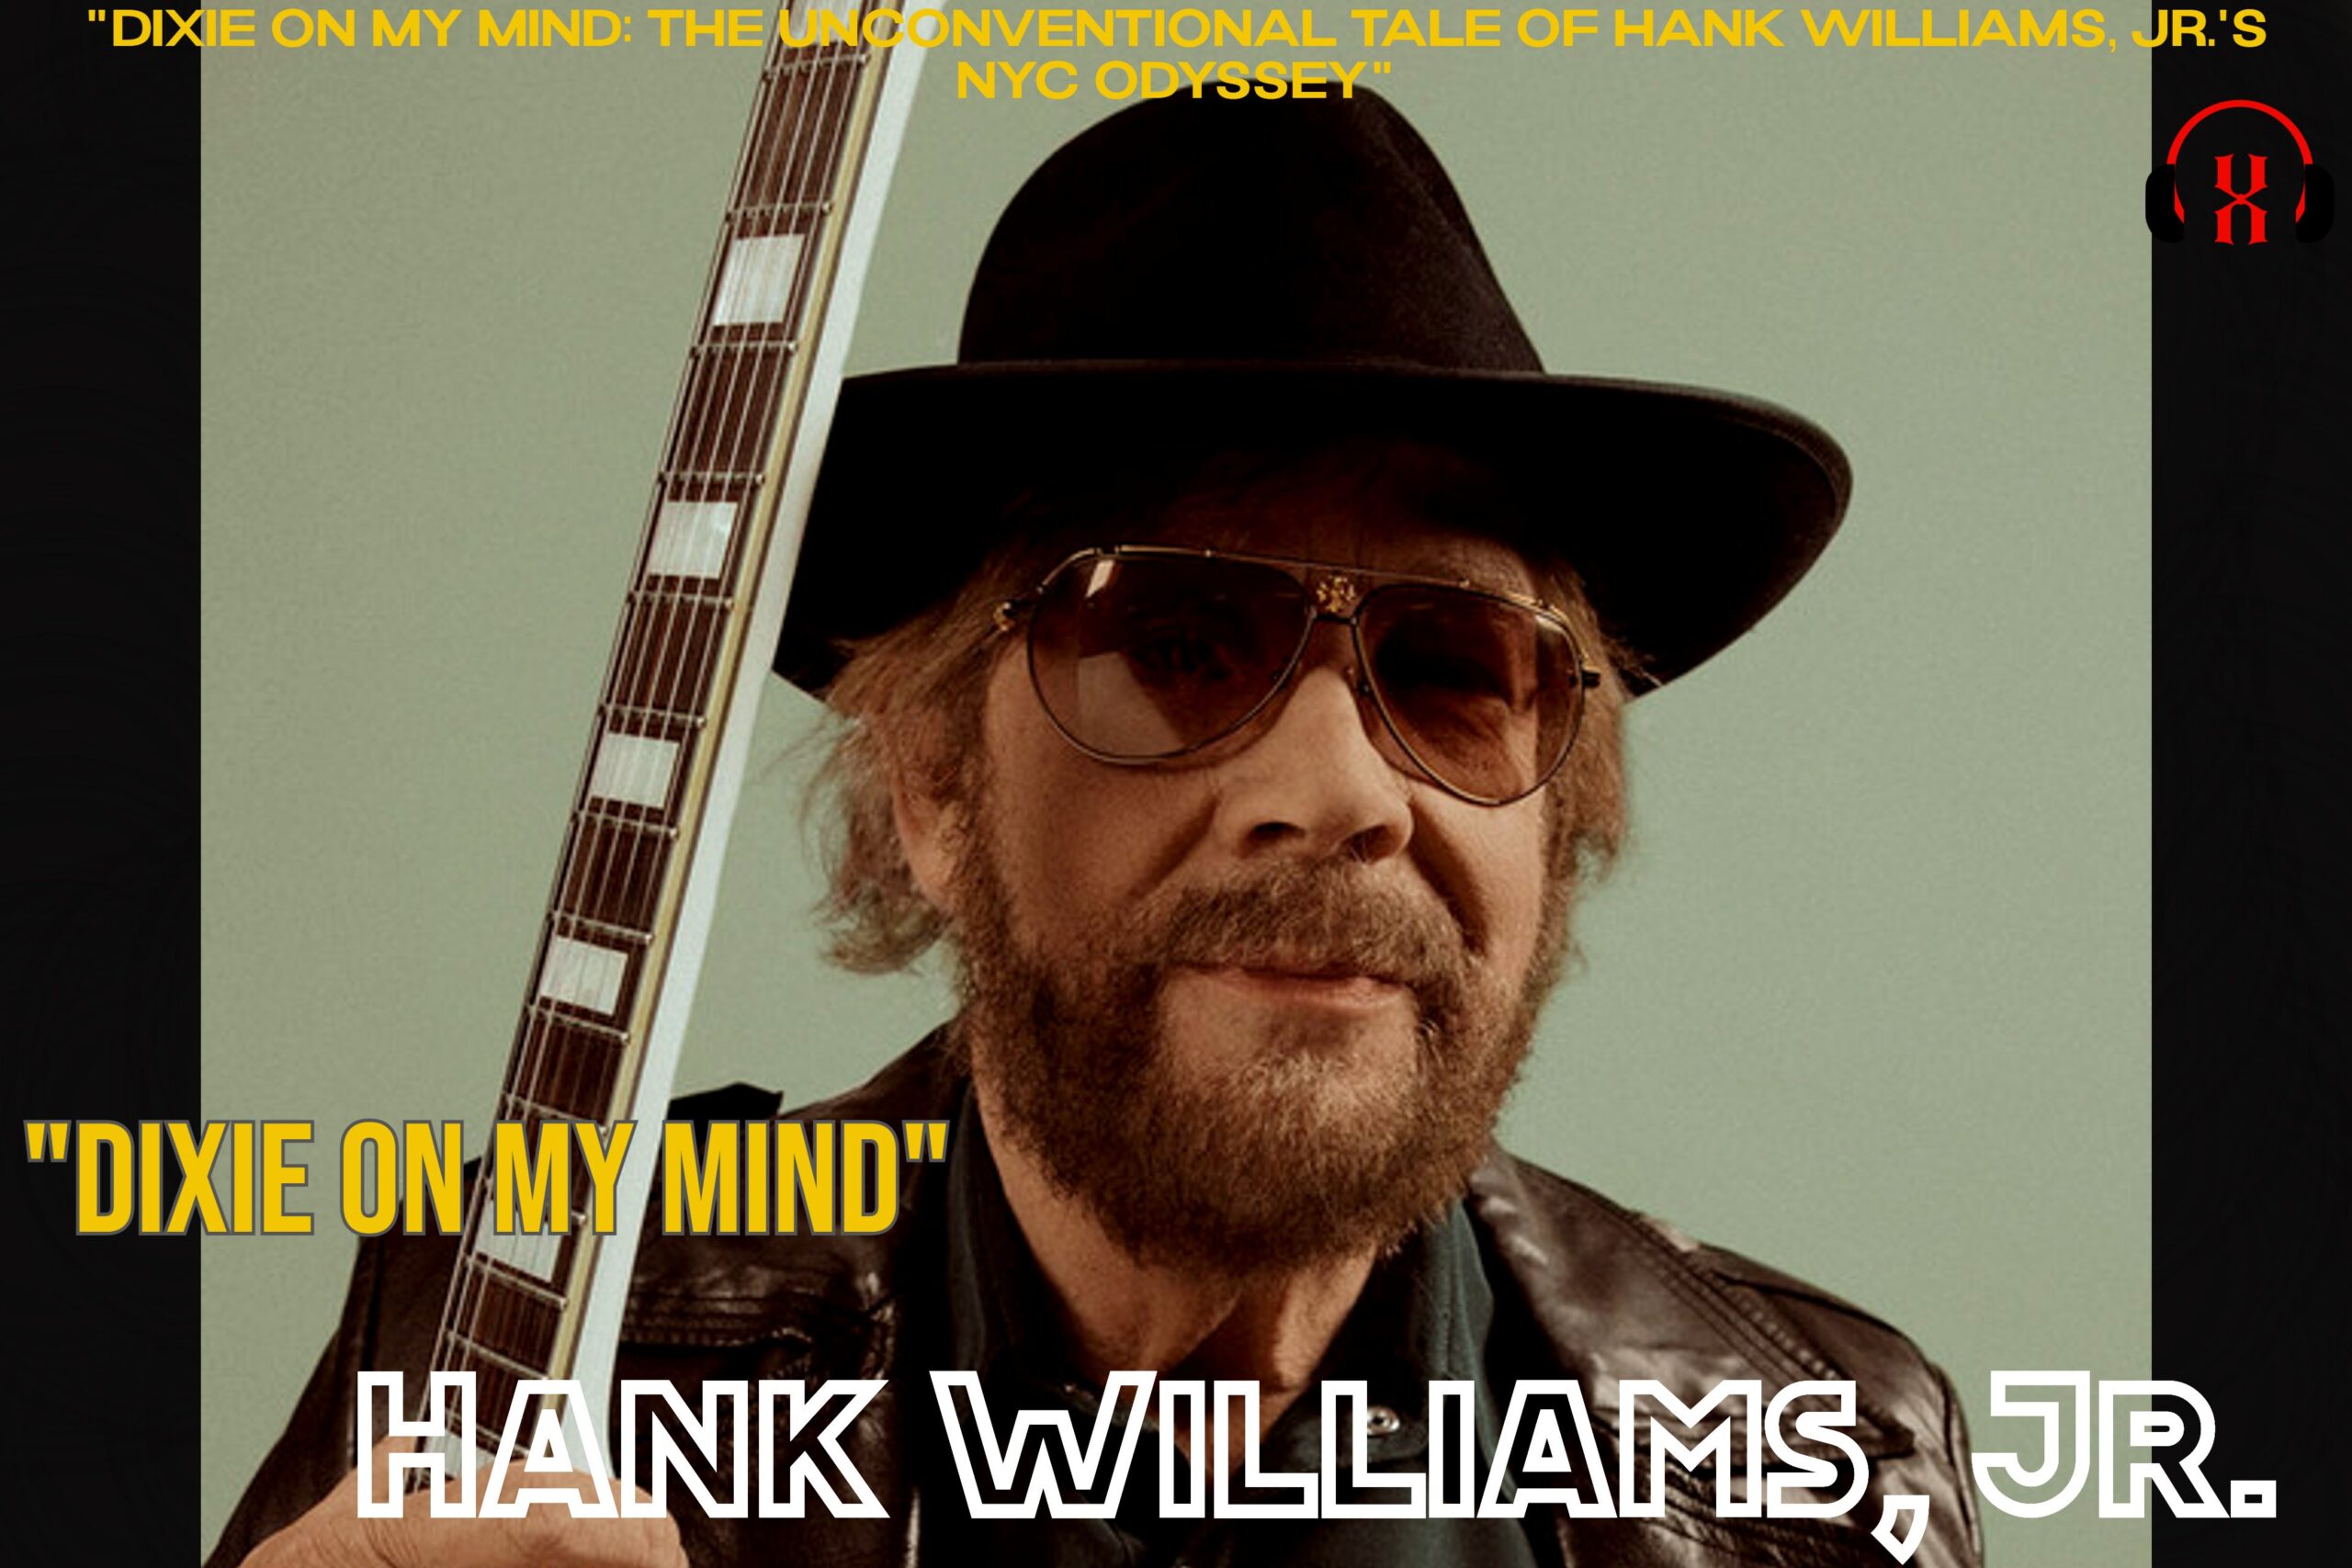 “Dixie on My Mind: The Unconventional Tale of Hank Williams, Jr.’s NYC Odyssey”